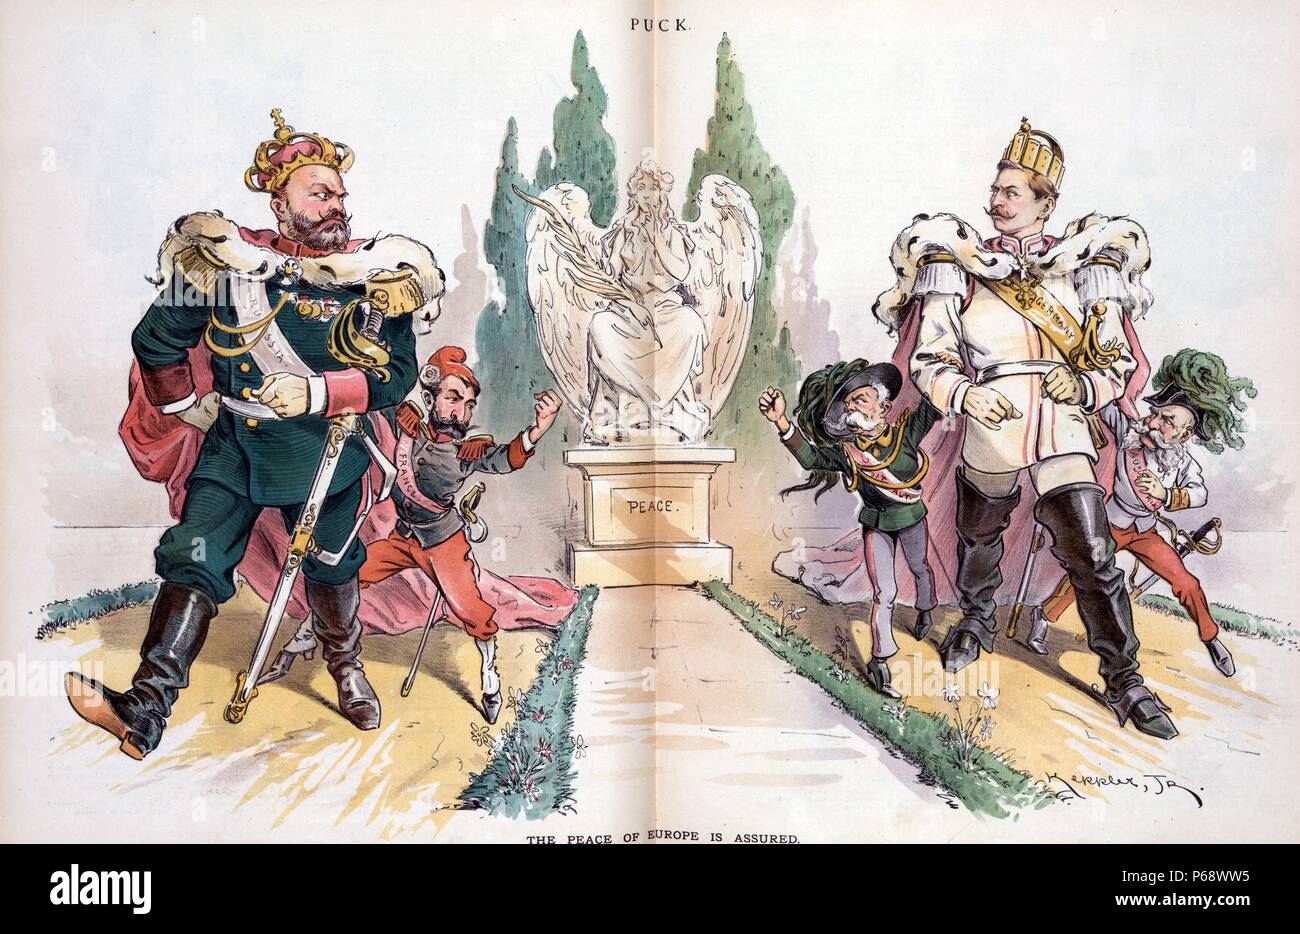 The peace of Europe is assured. by Udo Keppler, 1872-1956, artist. Published 1893. Alexander III, labelled 'Russia', looking at Wilhelm II, labelled 'Germany', who returns the glare, as they walk along a pathway away from a statue of 'Peace', Alexander III is accompanied by Sadi Carnot labelled 'France' who is shaking his fist at Umberto I, labelled 'Italy', who in turn shakes his fist, Franz Joseph I, labelled 'Austria', accompanies Wilhelm II Stock Photo